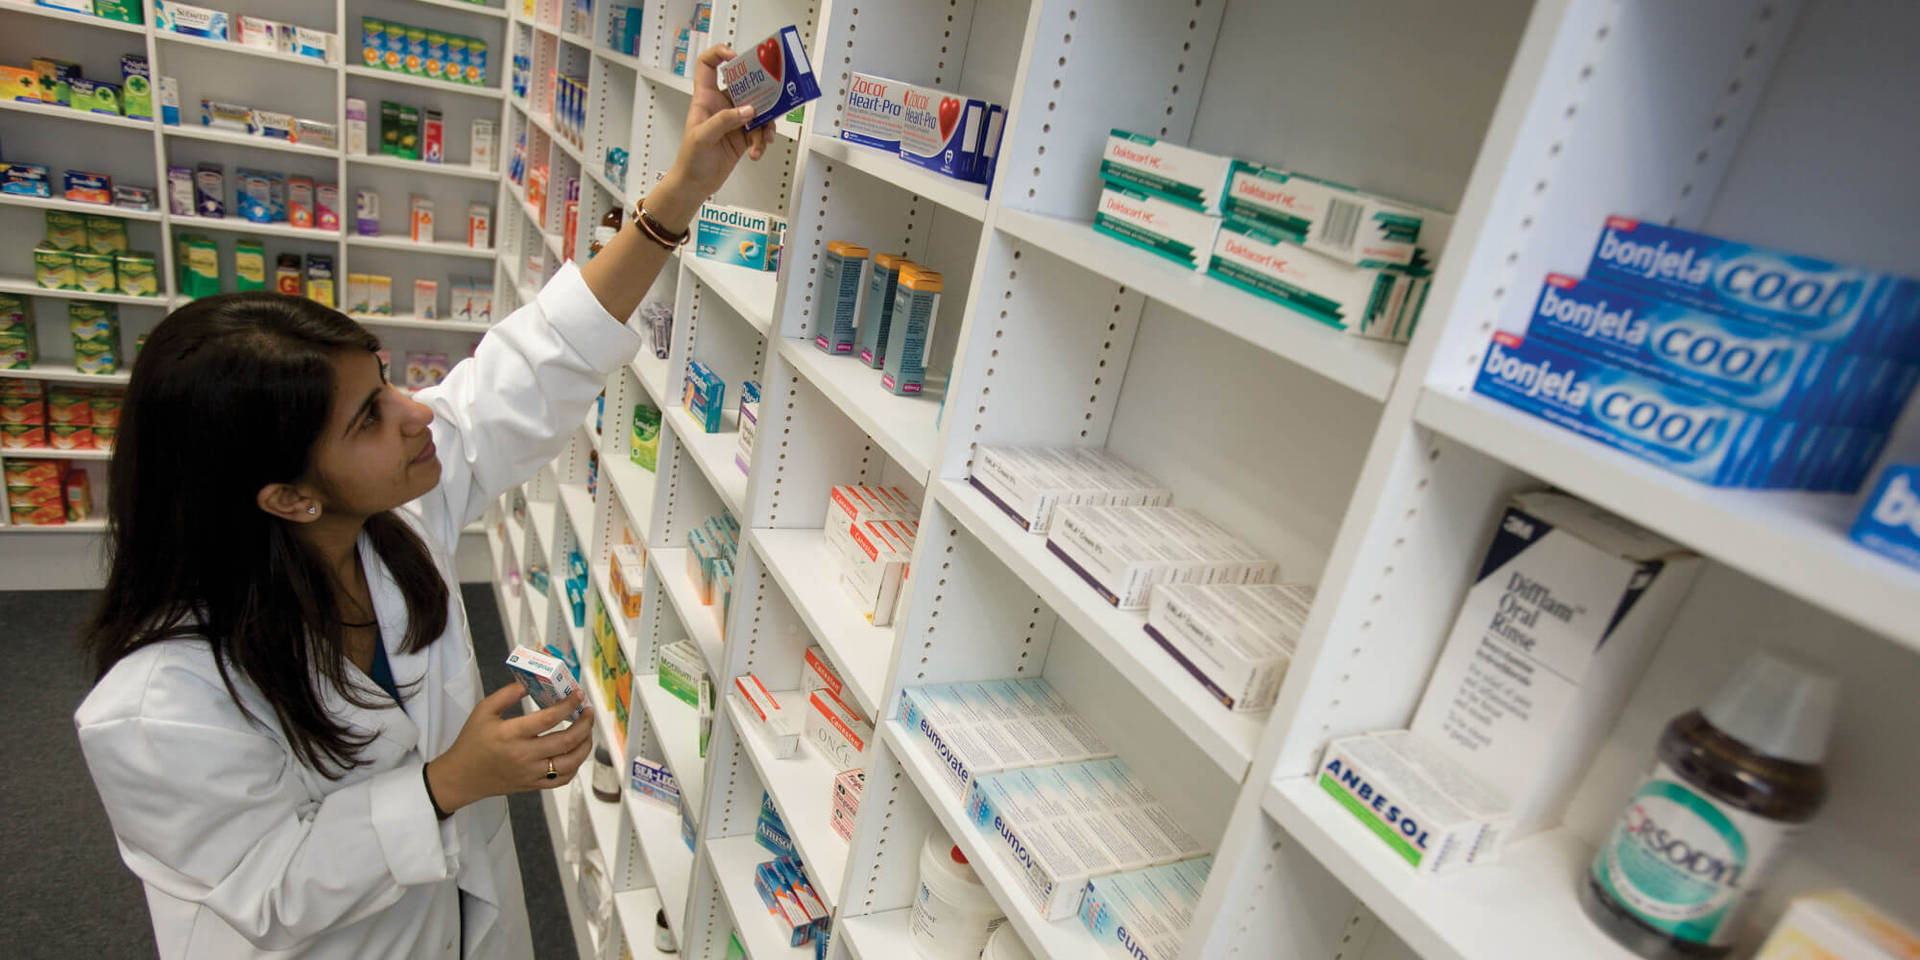 Caption: Dedicated Female Pharmacist Engaged In Medicine Check